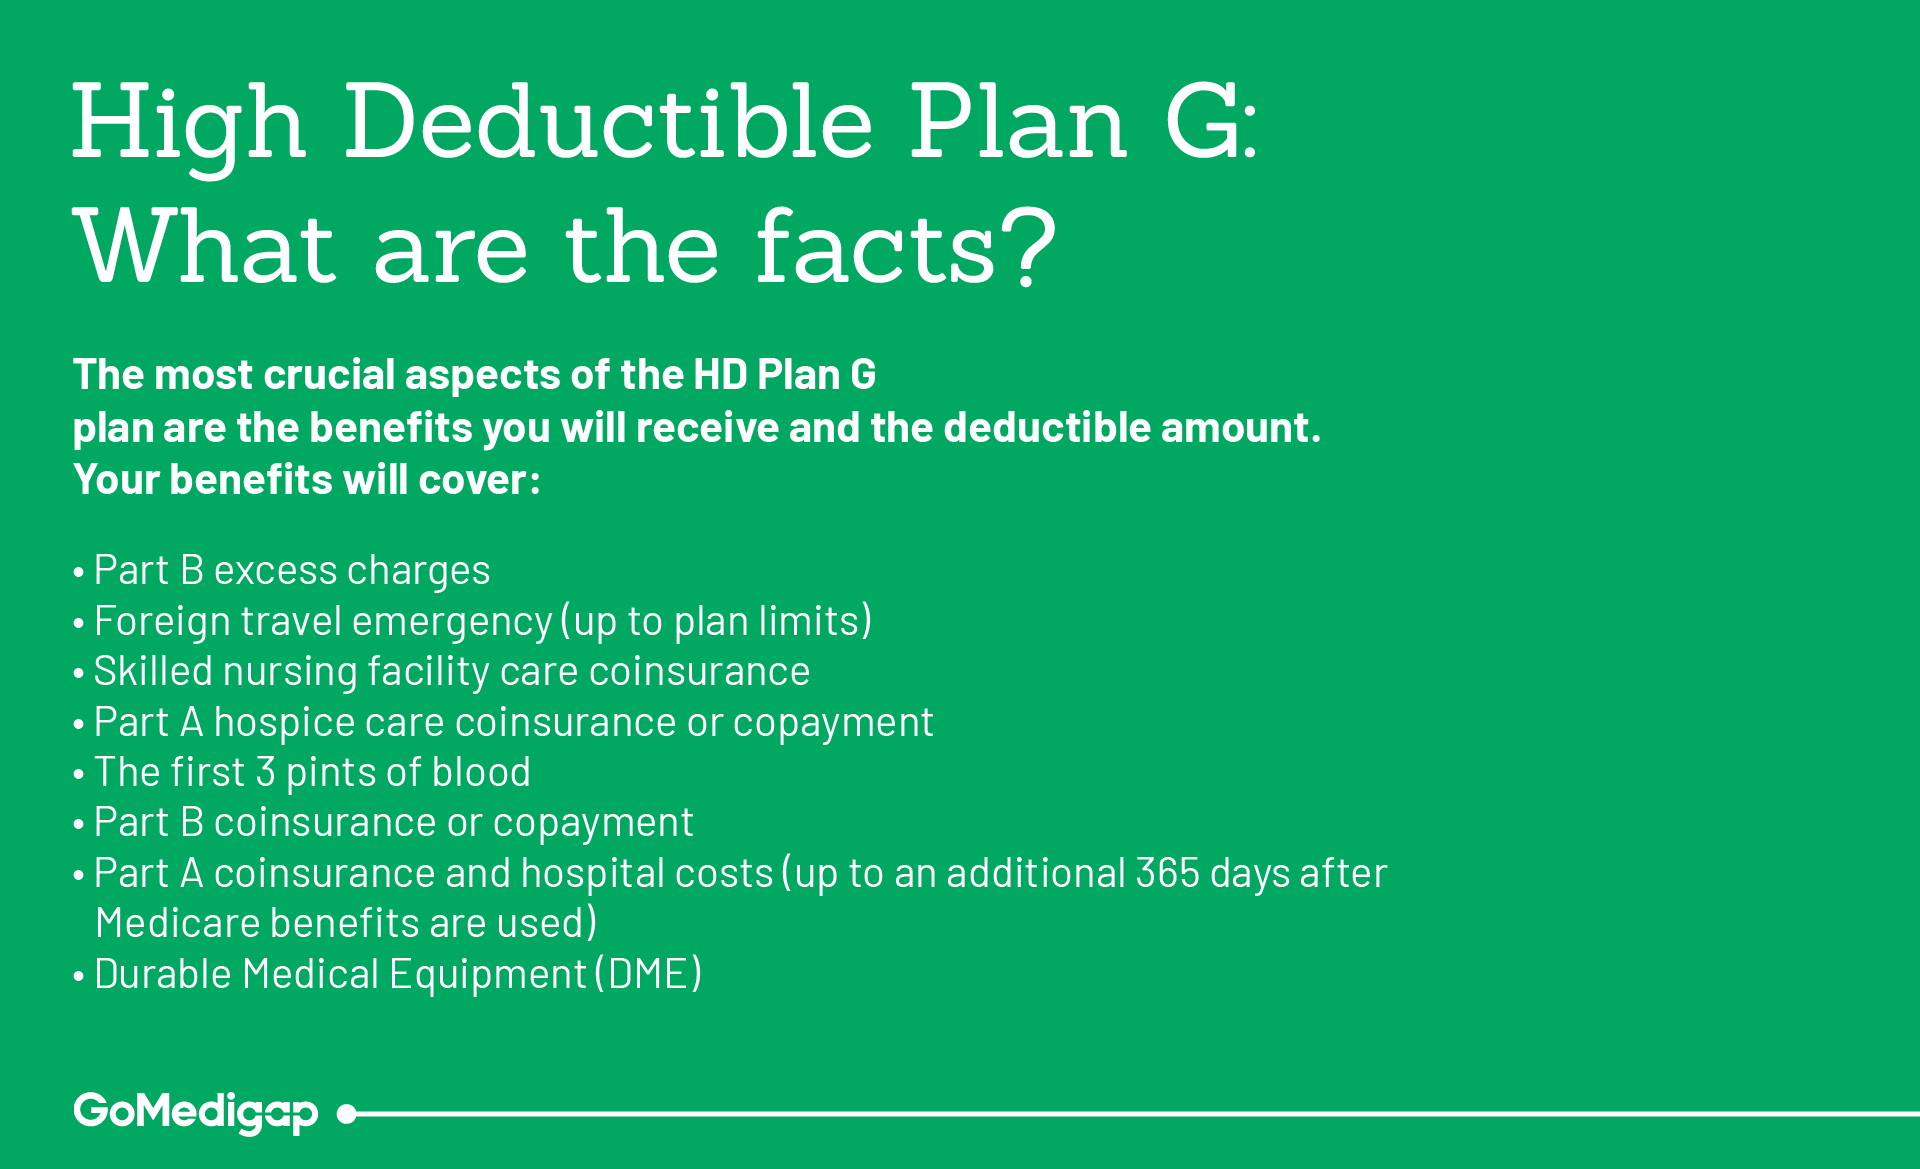 High Deductible Plan G: What are the facts?